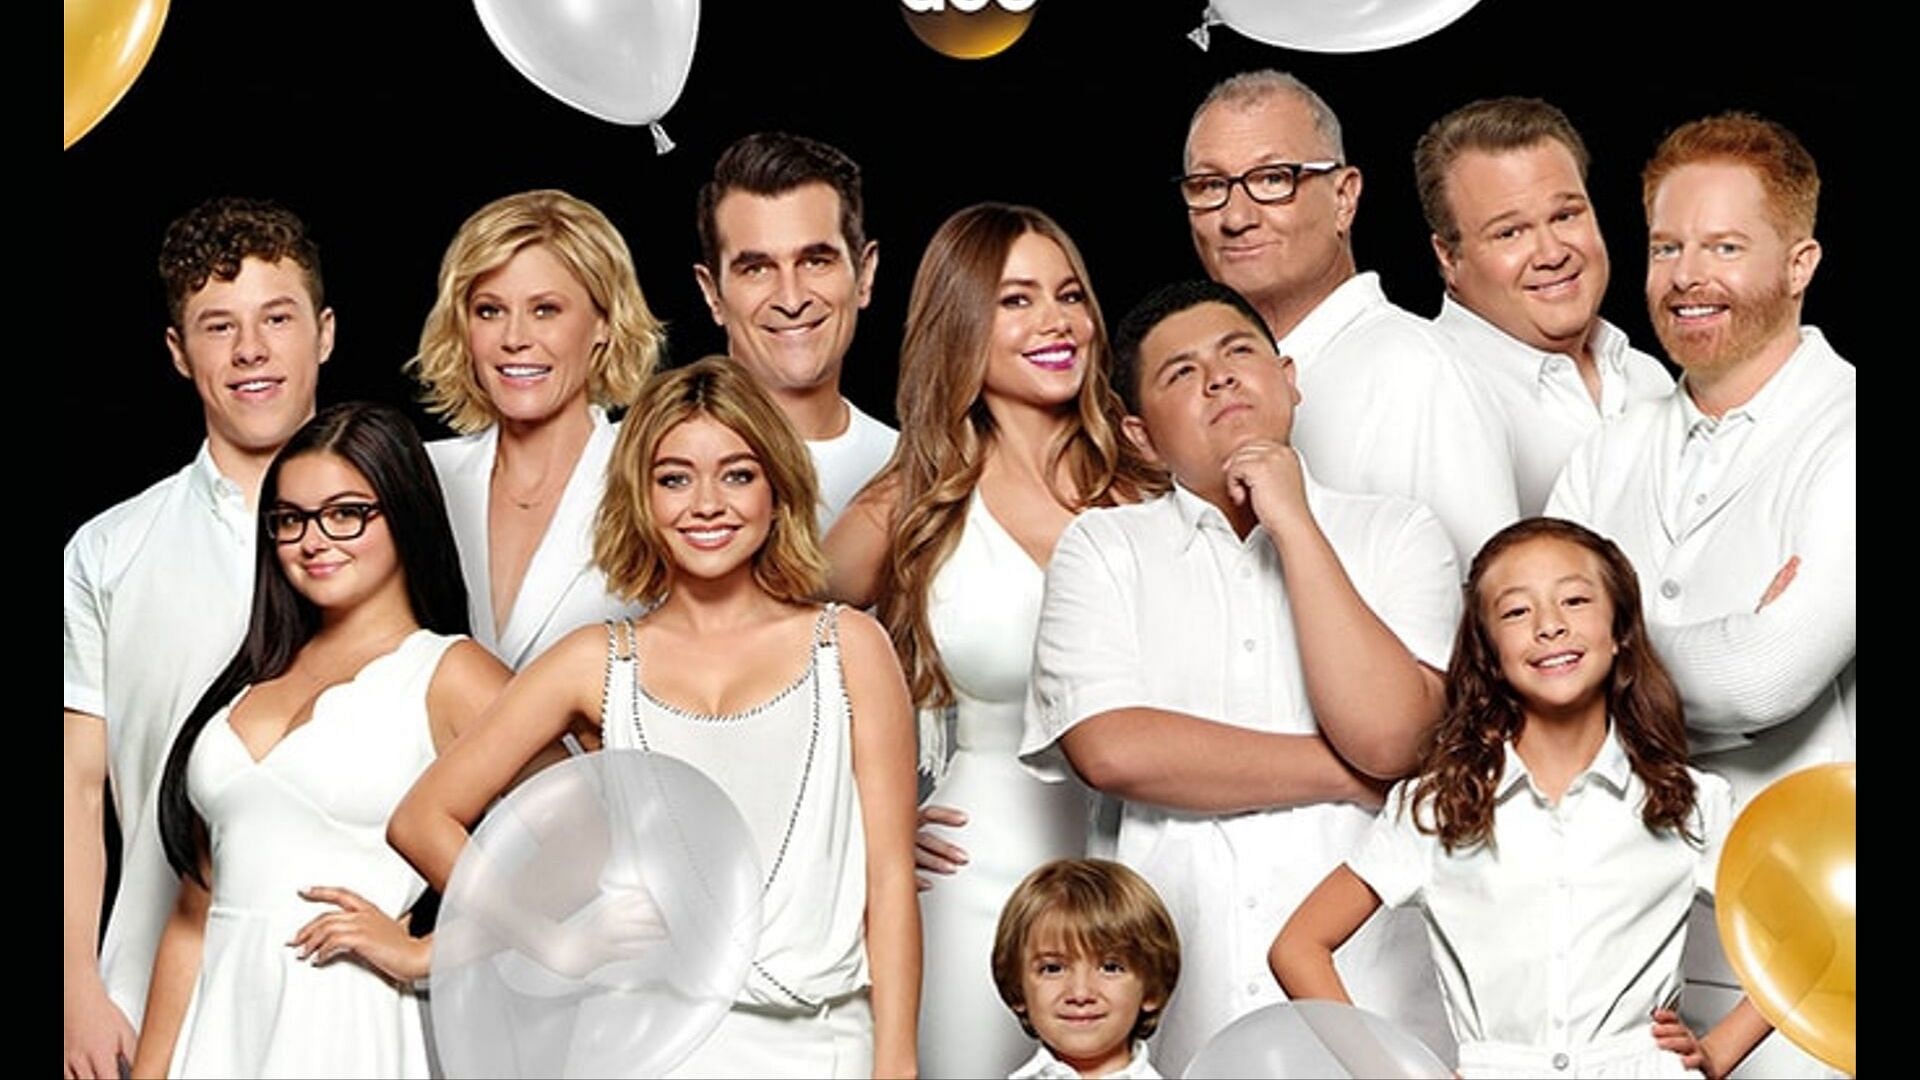 Modern Family Season 11: Cast, Storyline, Returning Characters - All You  Need to Know About Season 11 of Modern Family